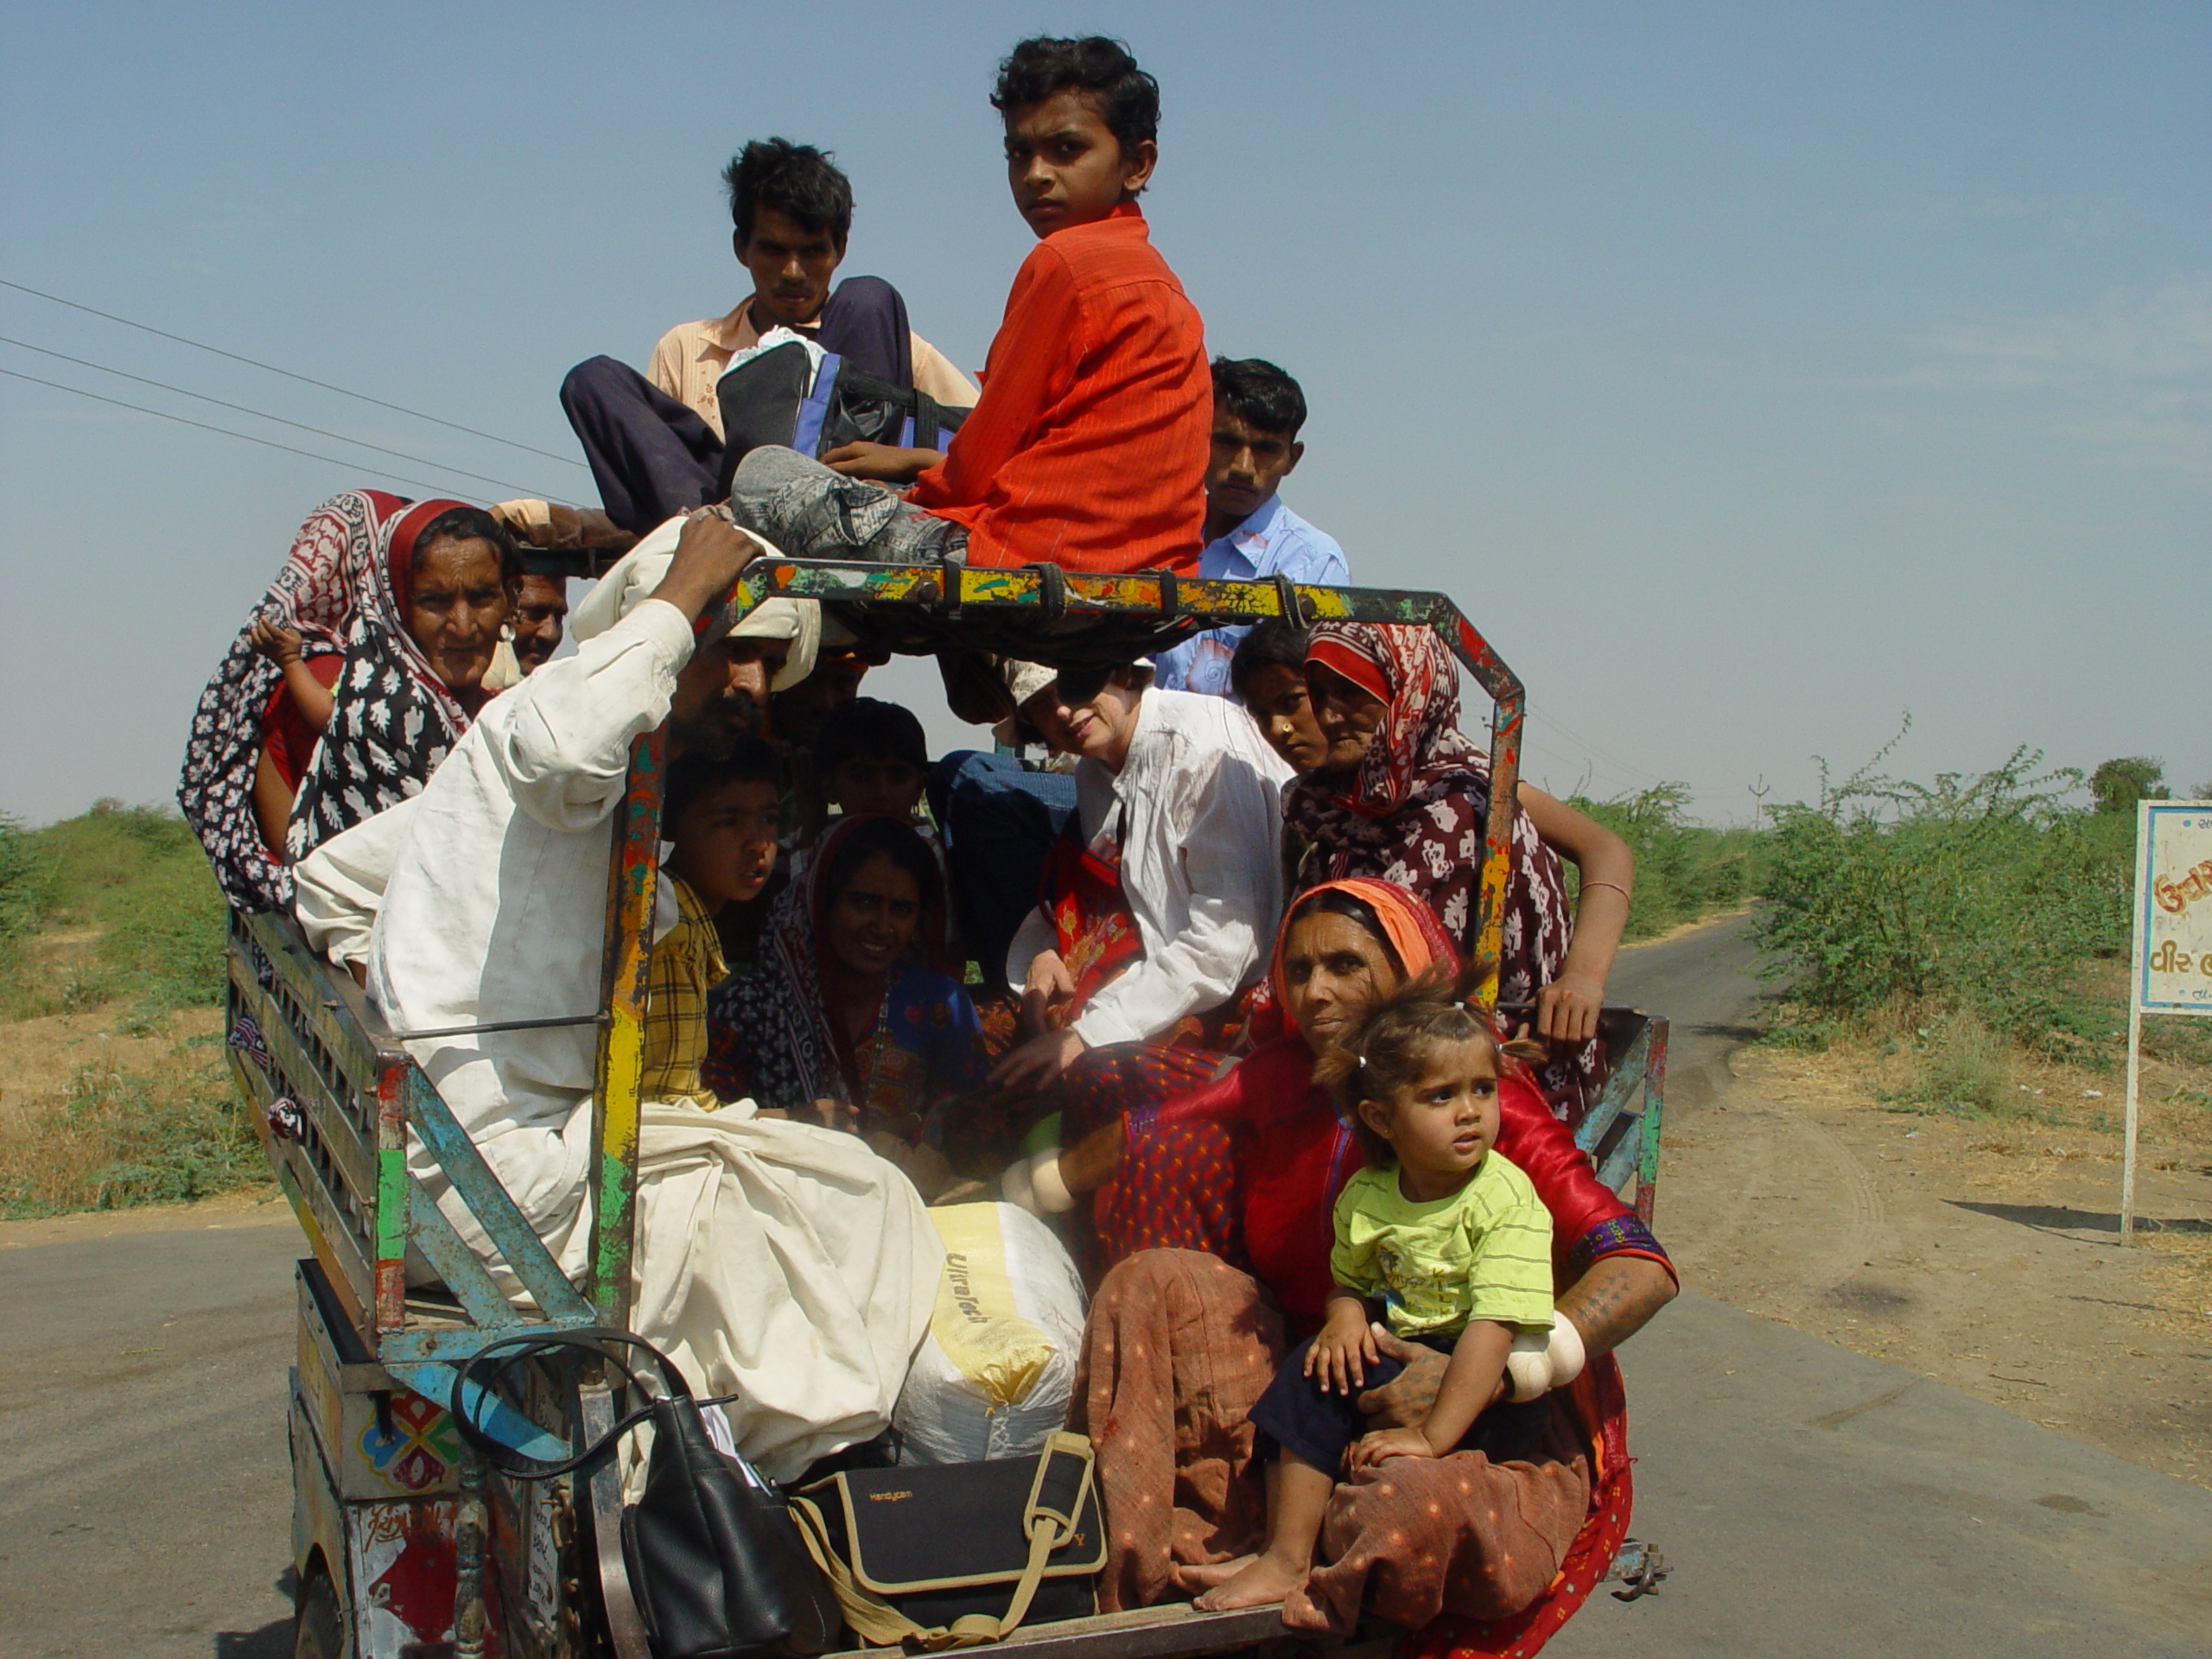 Sheila is squashed into the front in a white shirt, and hanging off the back is Puriben in the red top with her grandchild, en route for a day's work travelling to supervise the work of local embroiderers in the villages she is responsible for.